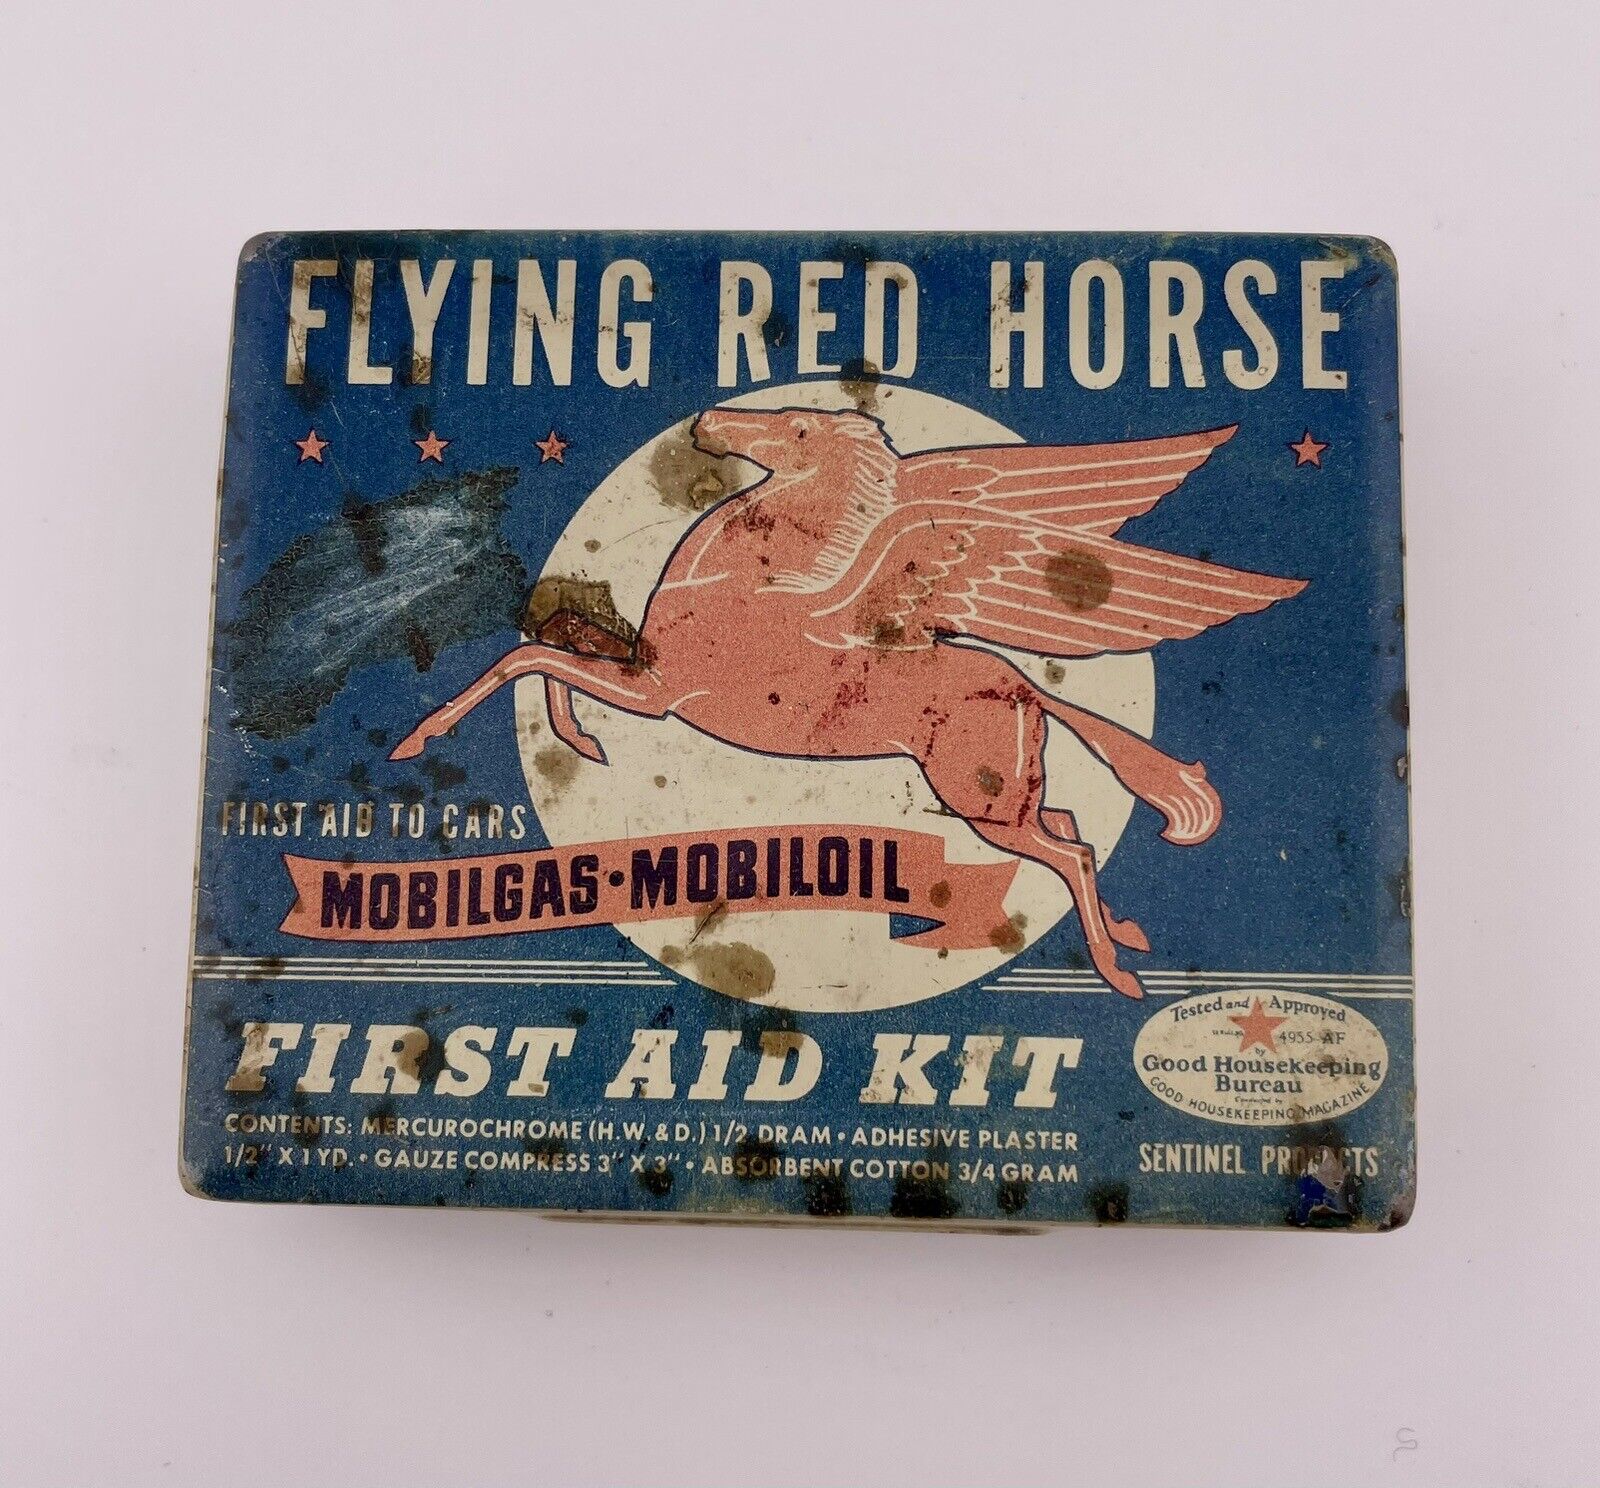 Vintage Flying Red Horse Mobilgas Mobiloil First Aid Kit Empty